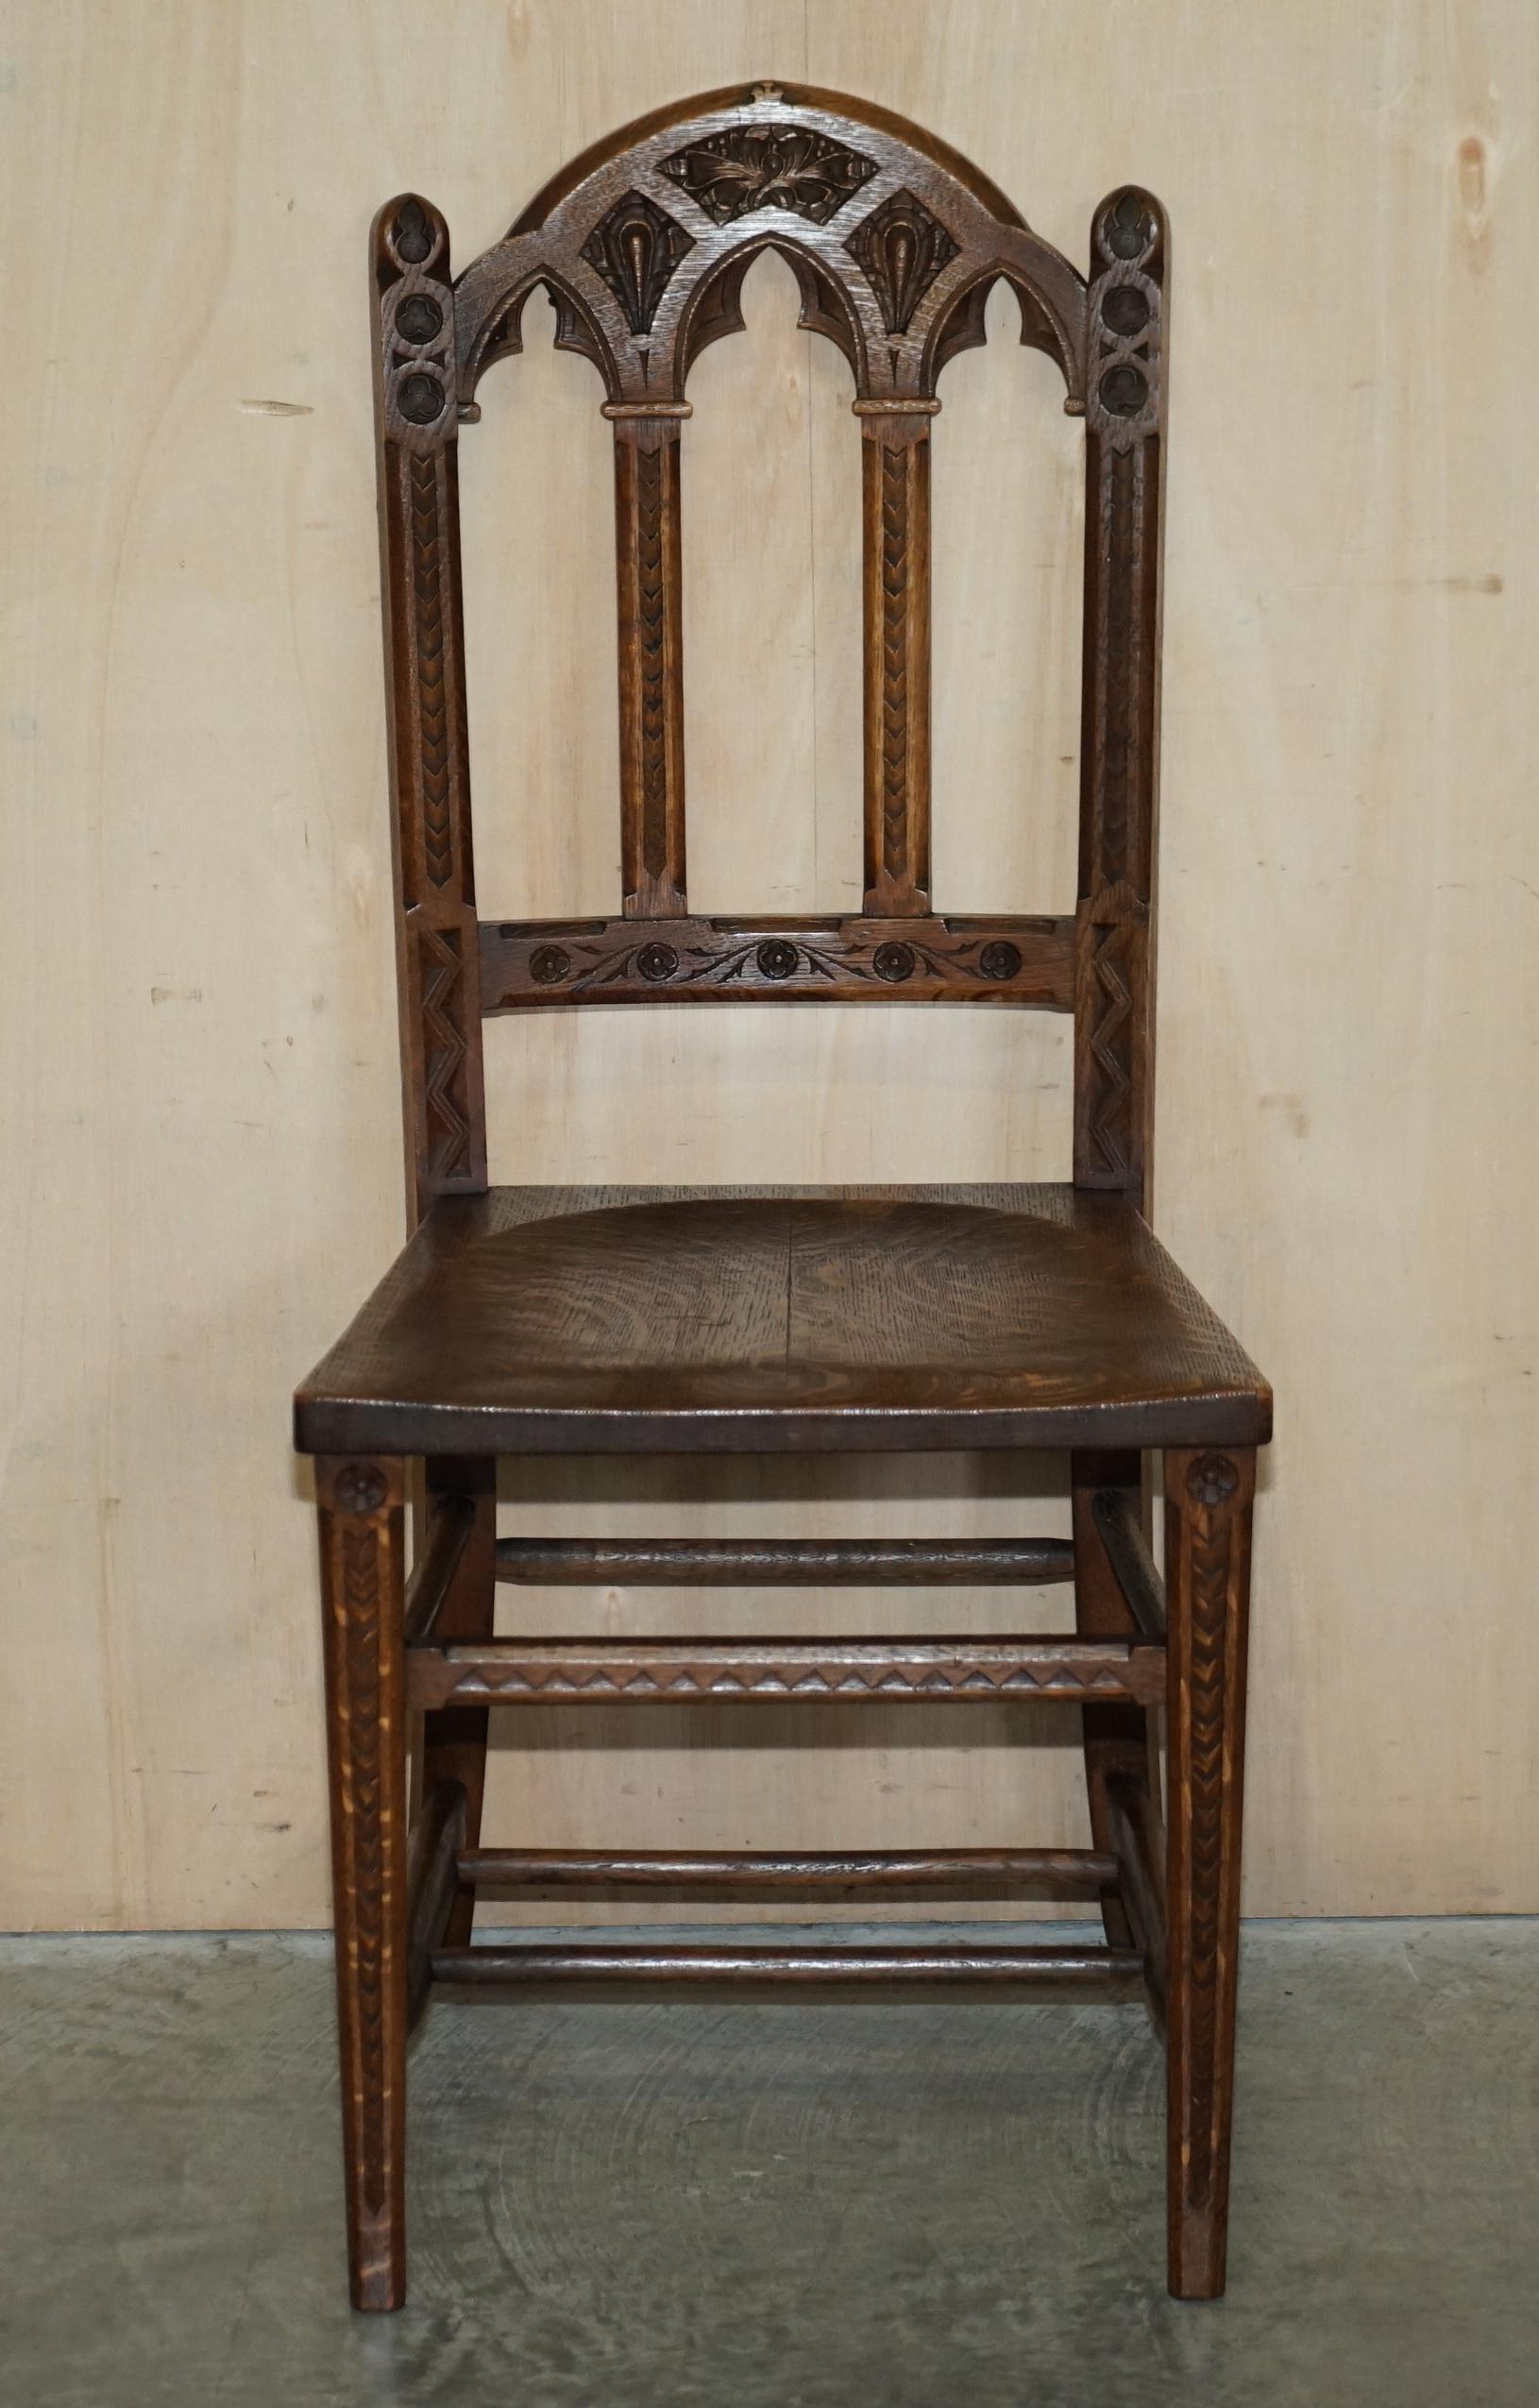 European SIX ANTIQUE ORNATELY CARVED STEEPLE BACK WALNUT GOTHIC REVIVAL DiNING CHAIRS For Sale